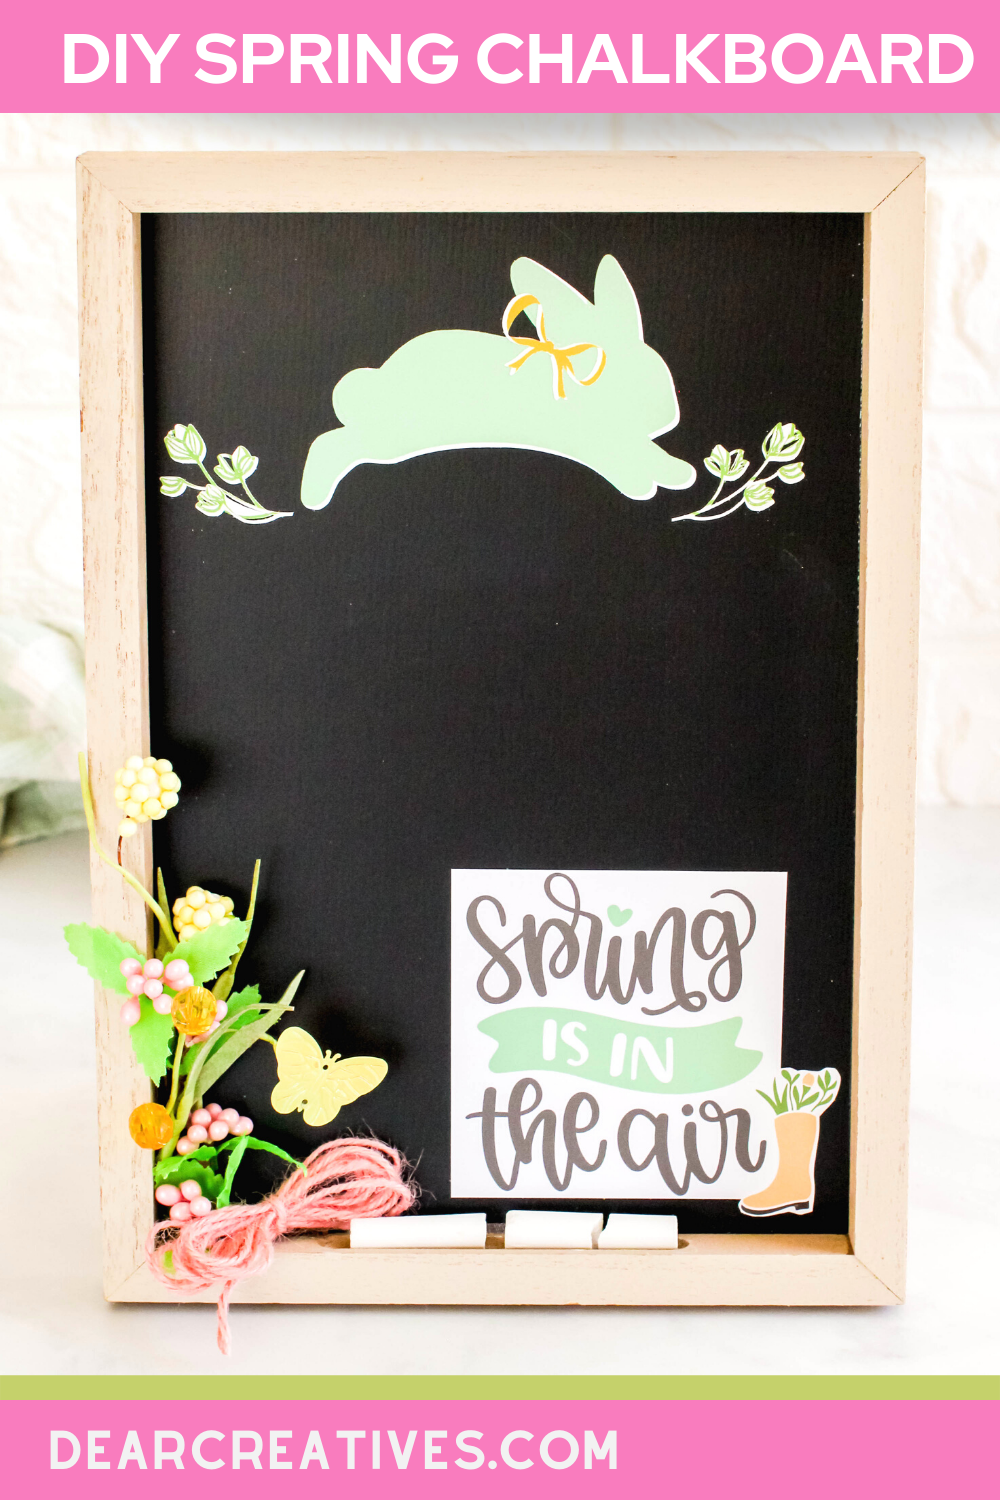 DIY Spring Chalkboard - This is an easy chalkboard art idea. Using stickers made with a Cricut (or purchased), artificial flowers, and a chalkboard. See how to decorate a chalkboard for spring! Find this and other DIY home decor ideas at DearCreatives.com